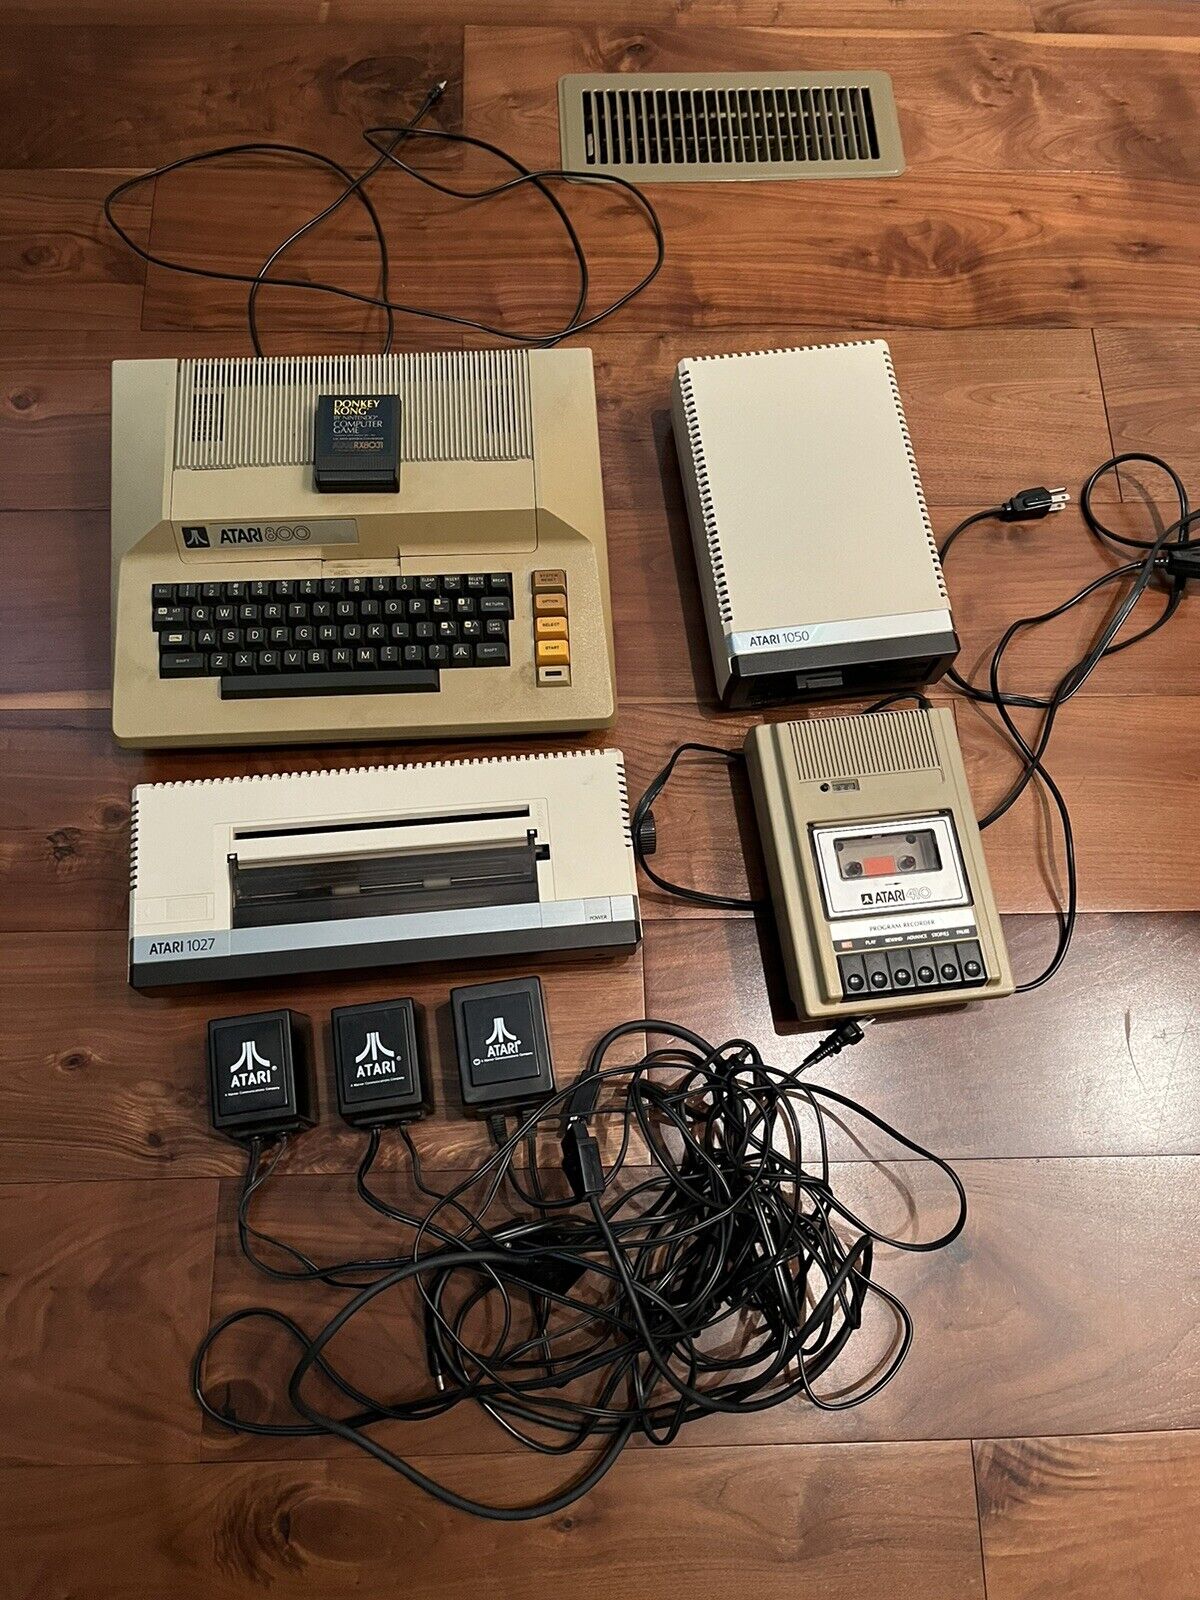 Atari 800 computer And Accessories, Out of the attic, Guessing it all works